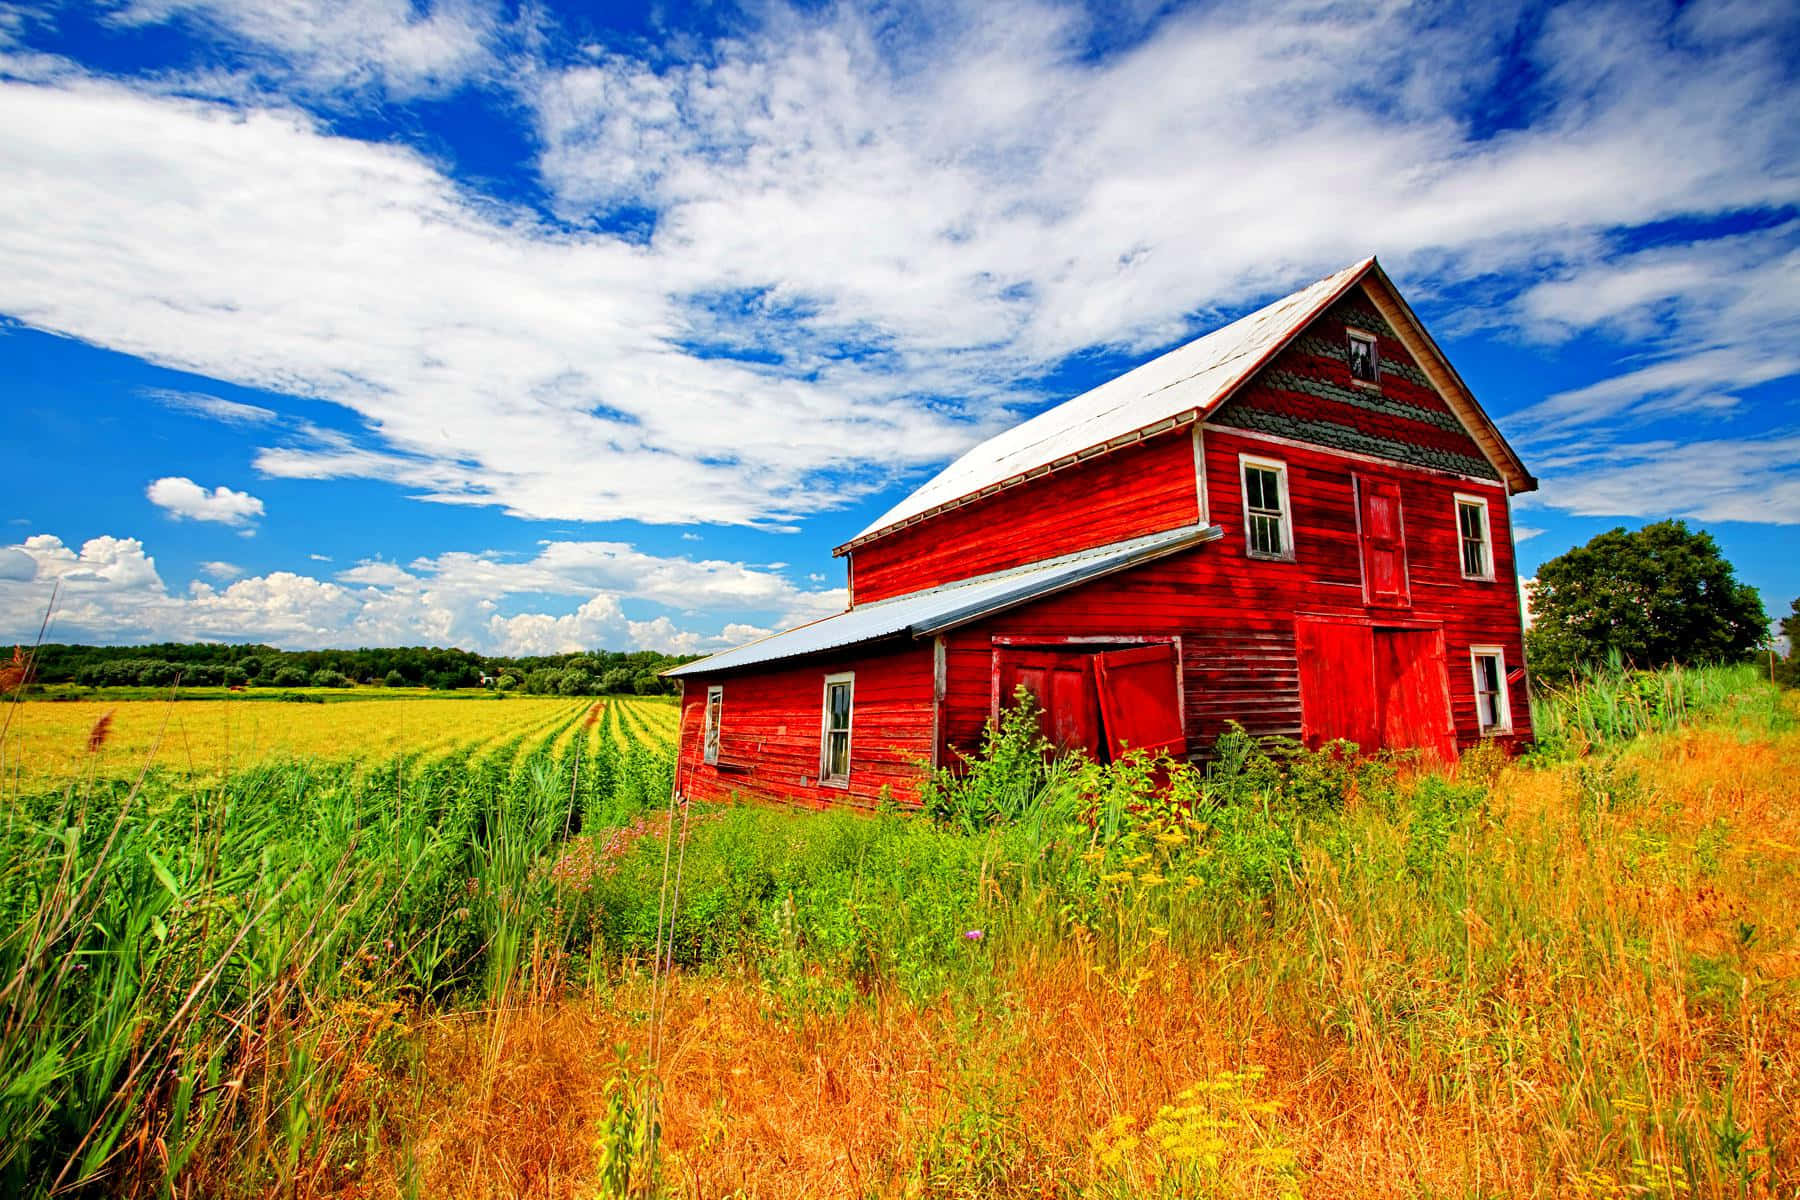 The beauty of pastoral life - a traditional rustic barn